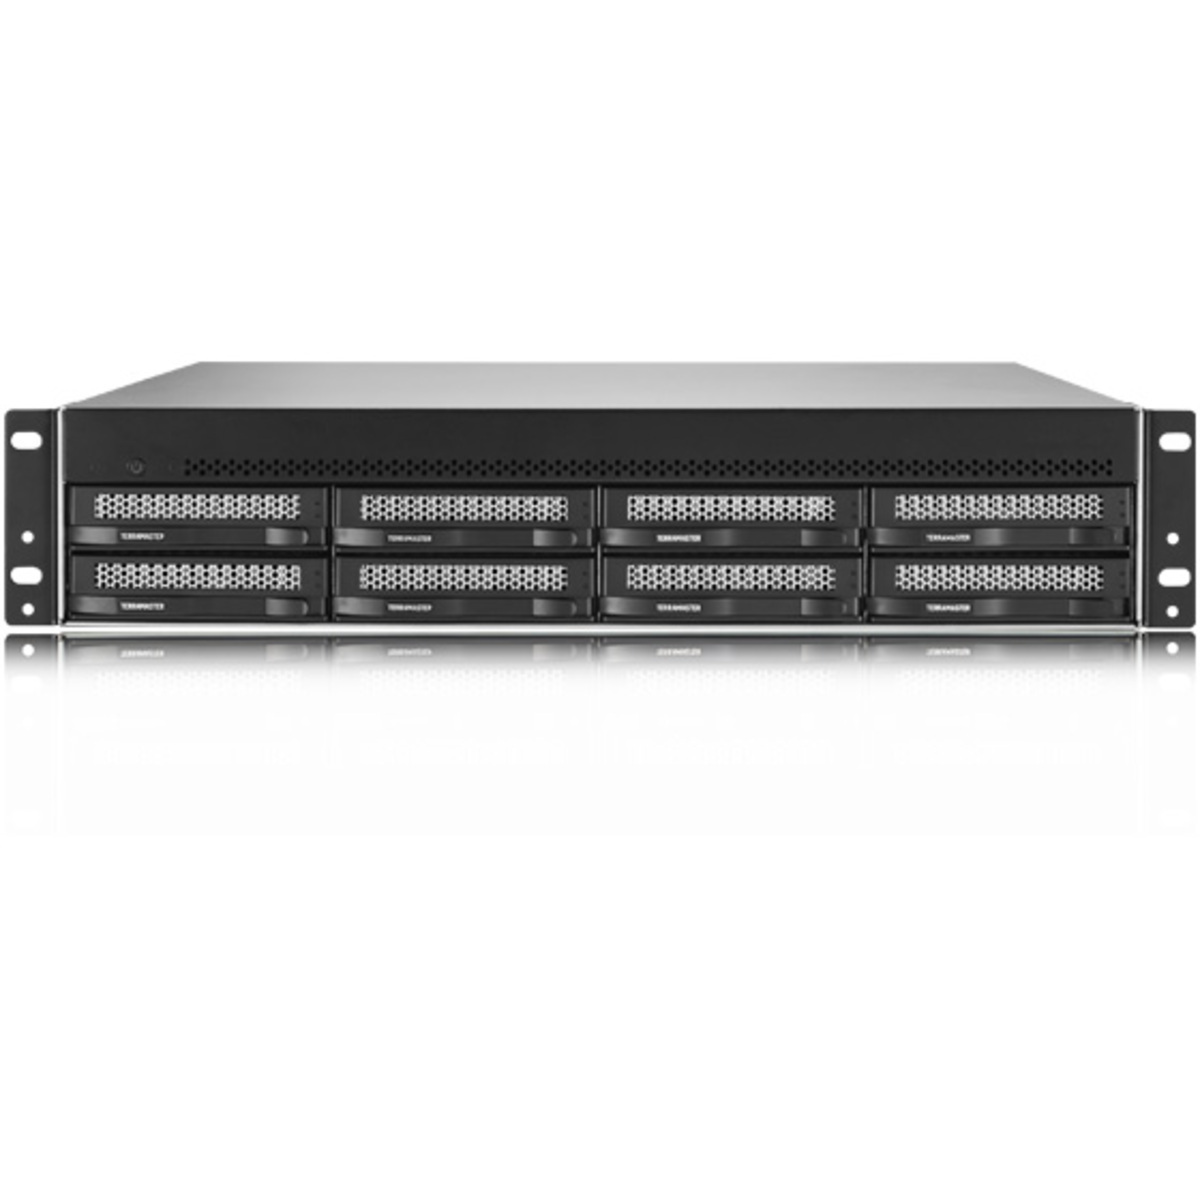 TerraMaster U8-450 96tb 8-Bay RackMount Multimedia / Power User / Business NAS - Network Attached Storage Device 6x16tb Seagate EXOS X18 ST16000NM000J 3.5 7200rpm SATA 6Gb/s HDD ENTERPRISE Class Drives Installed - Burn-In Tested U8-450